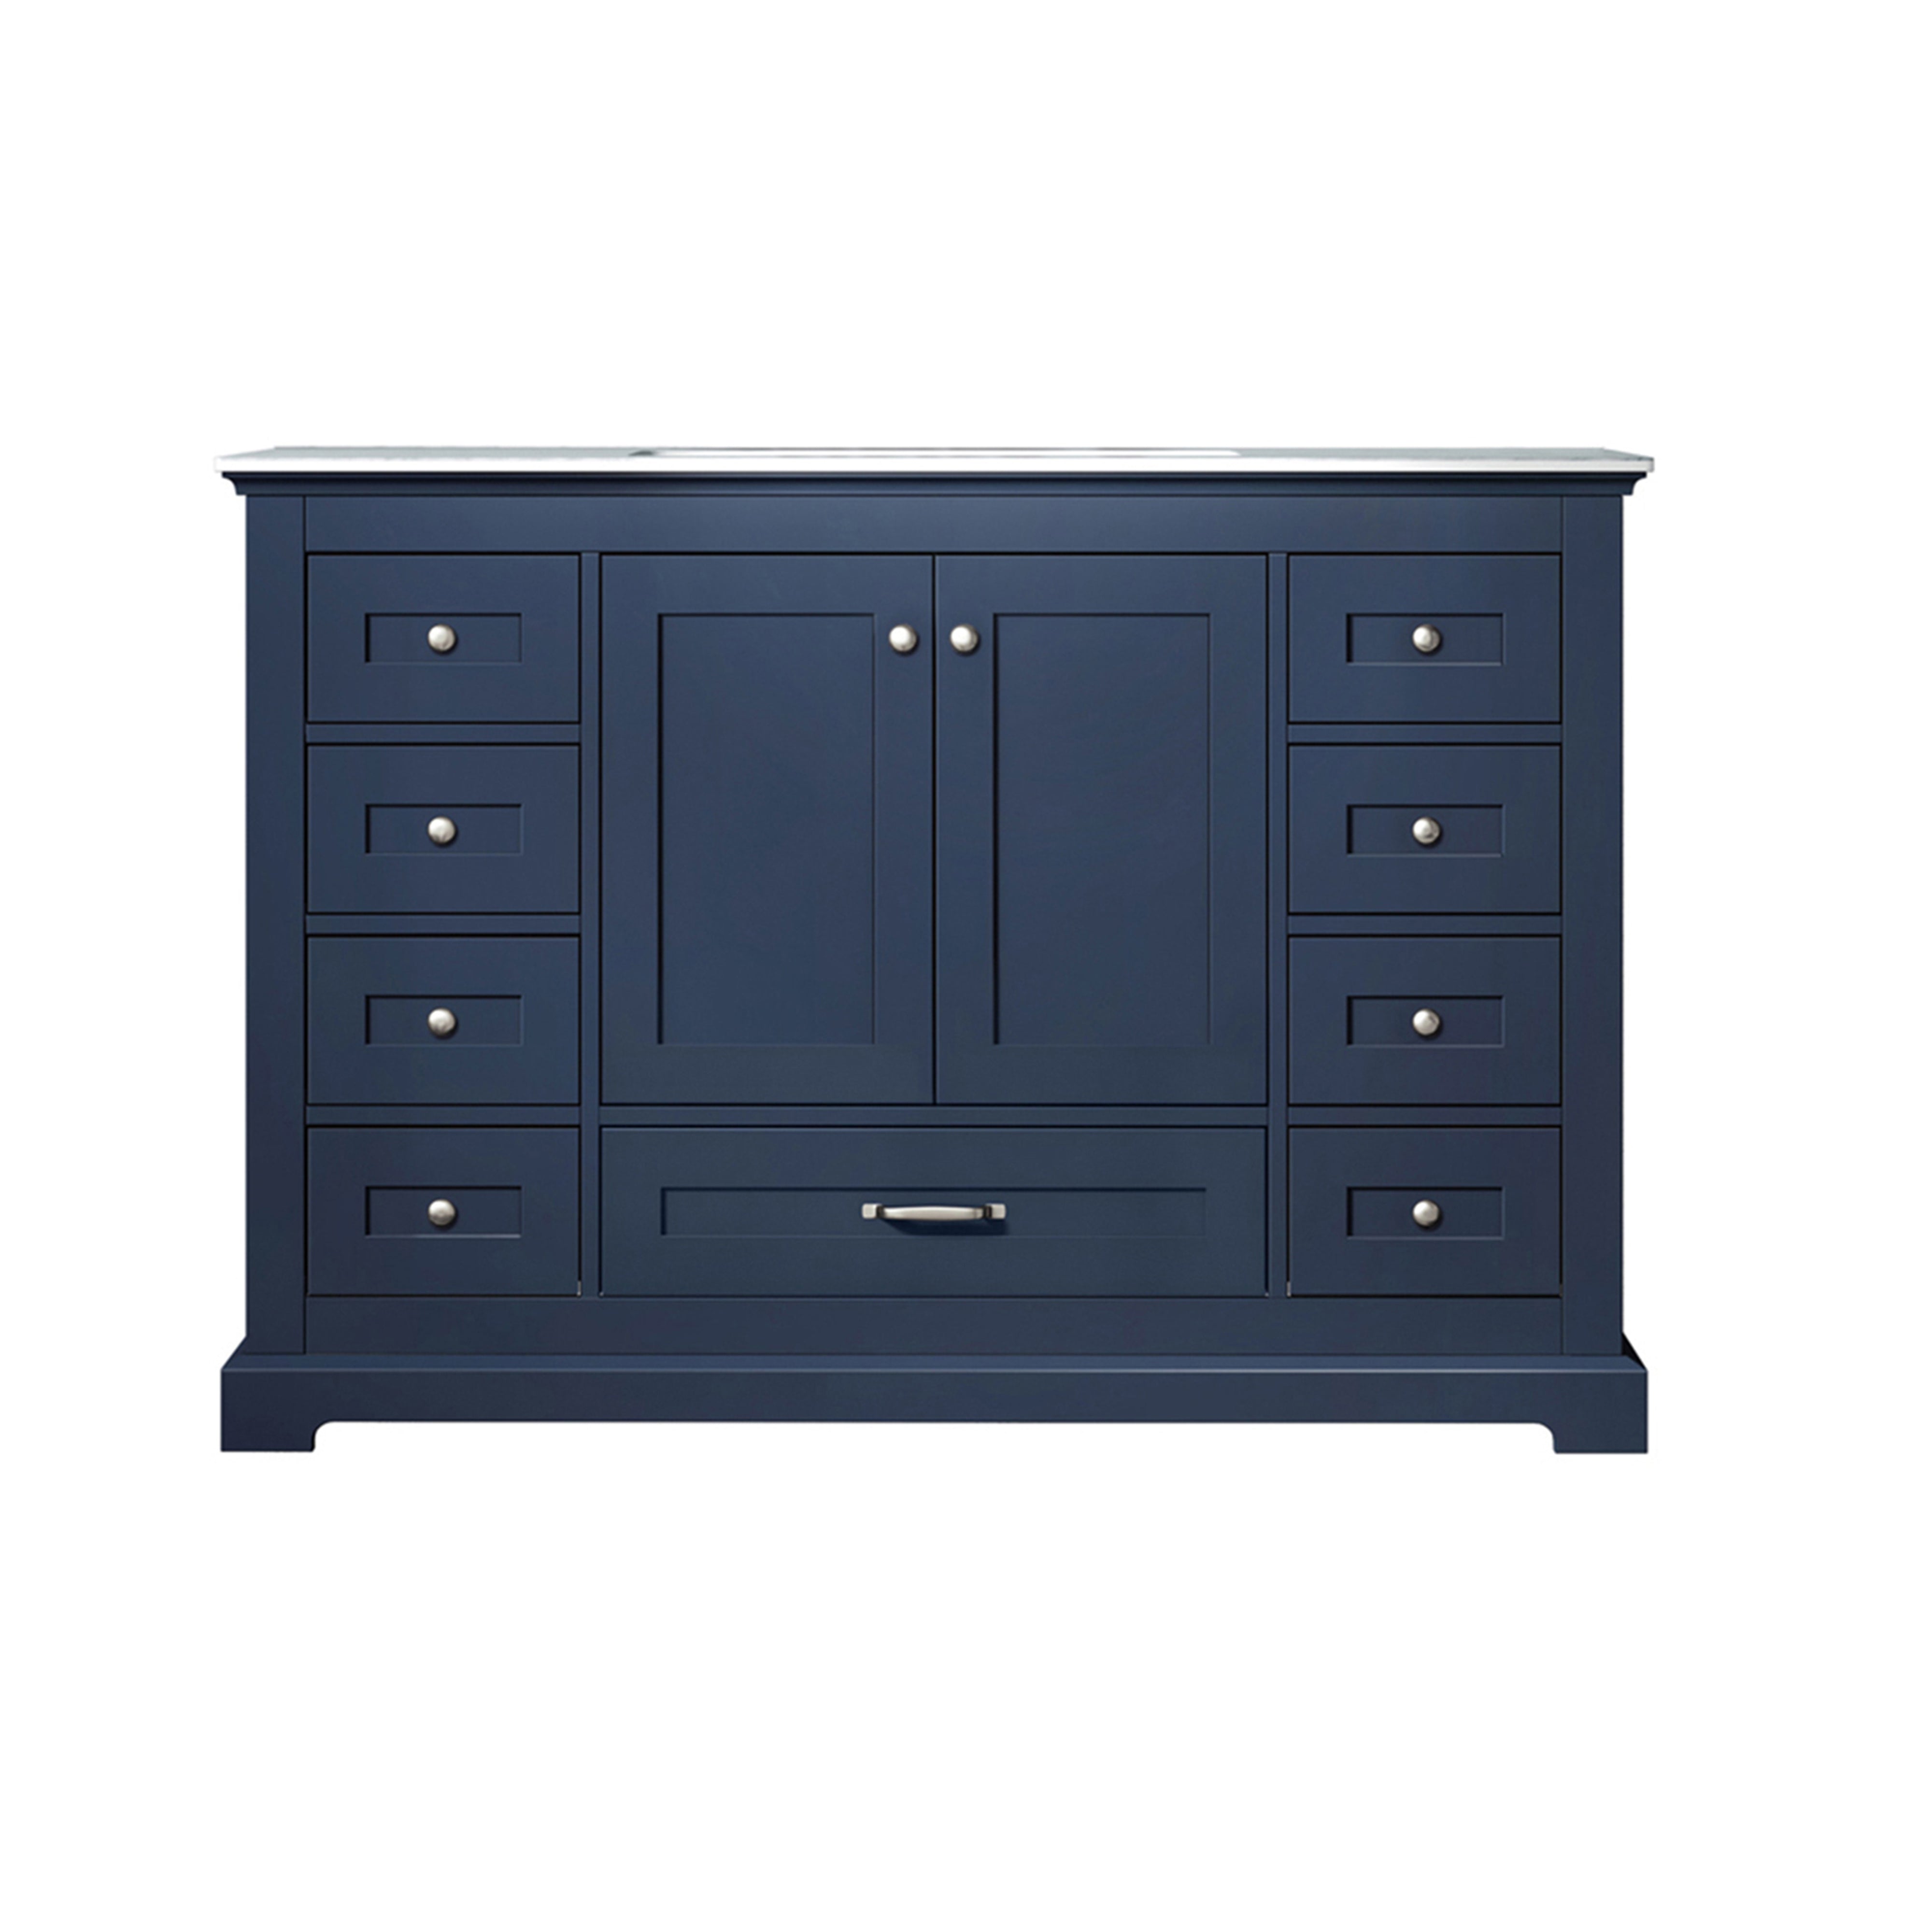 Lexora Dukes LD342248SEDS000 48" Single Bathroom Vanity in Navy Blue with White Carrara Marble, White Rectangle Sink, Front View